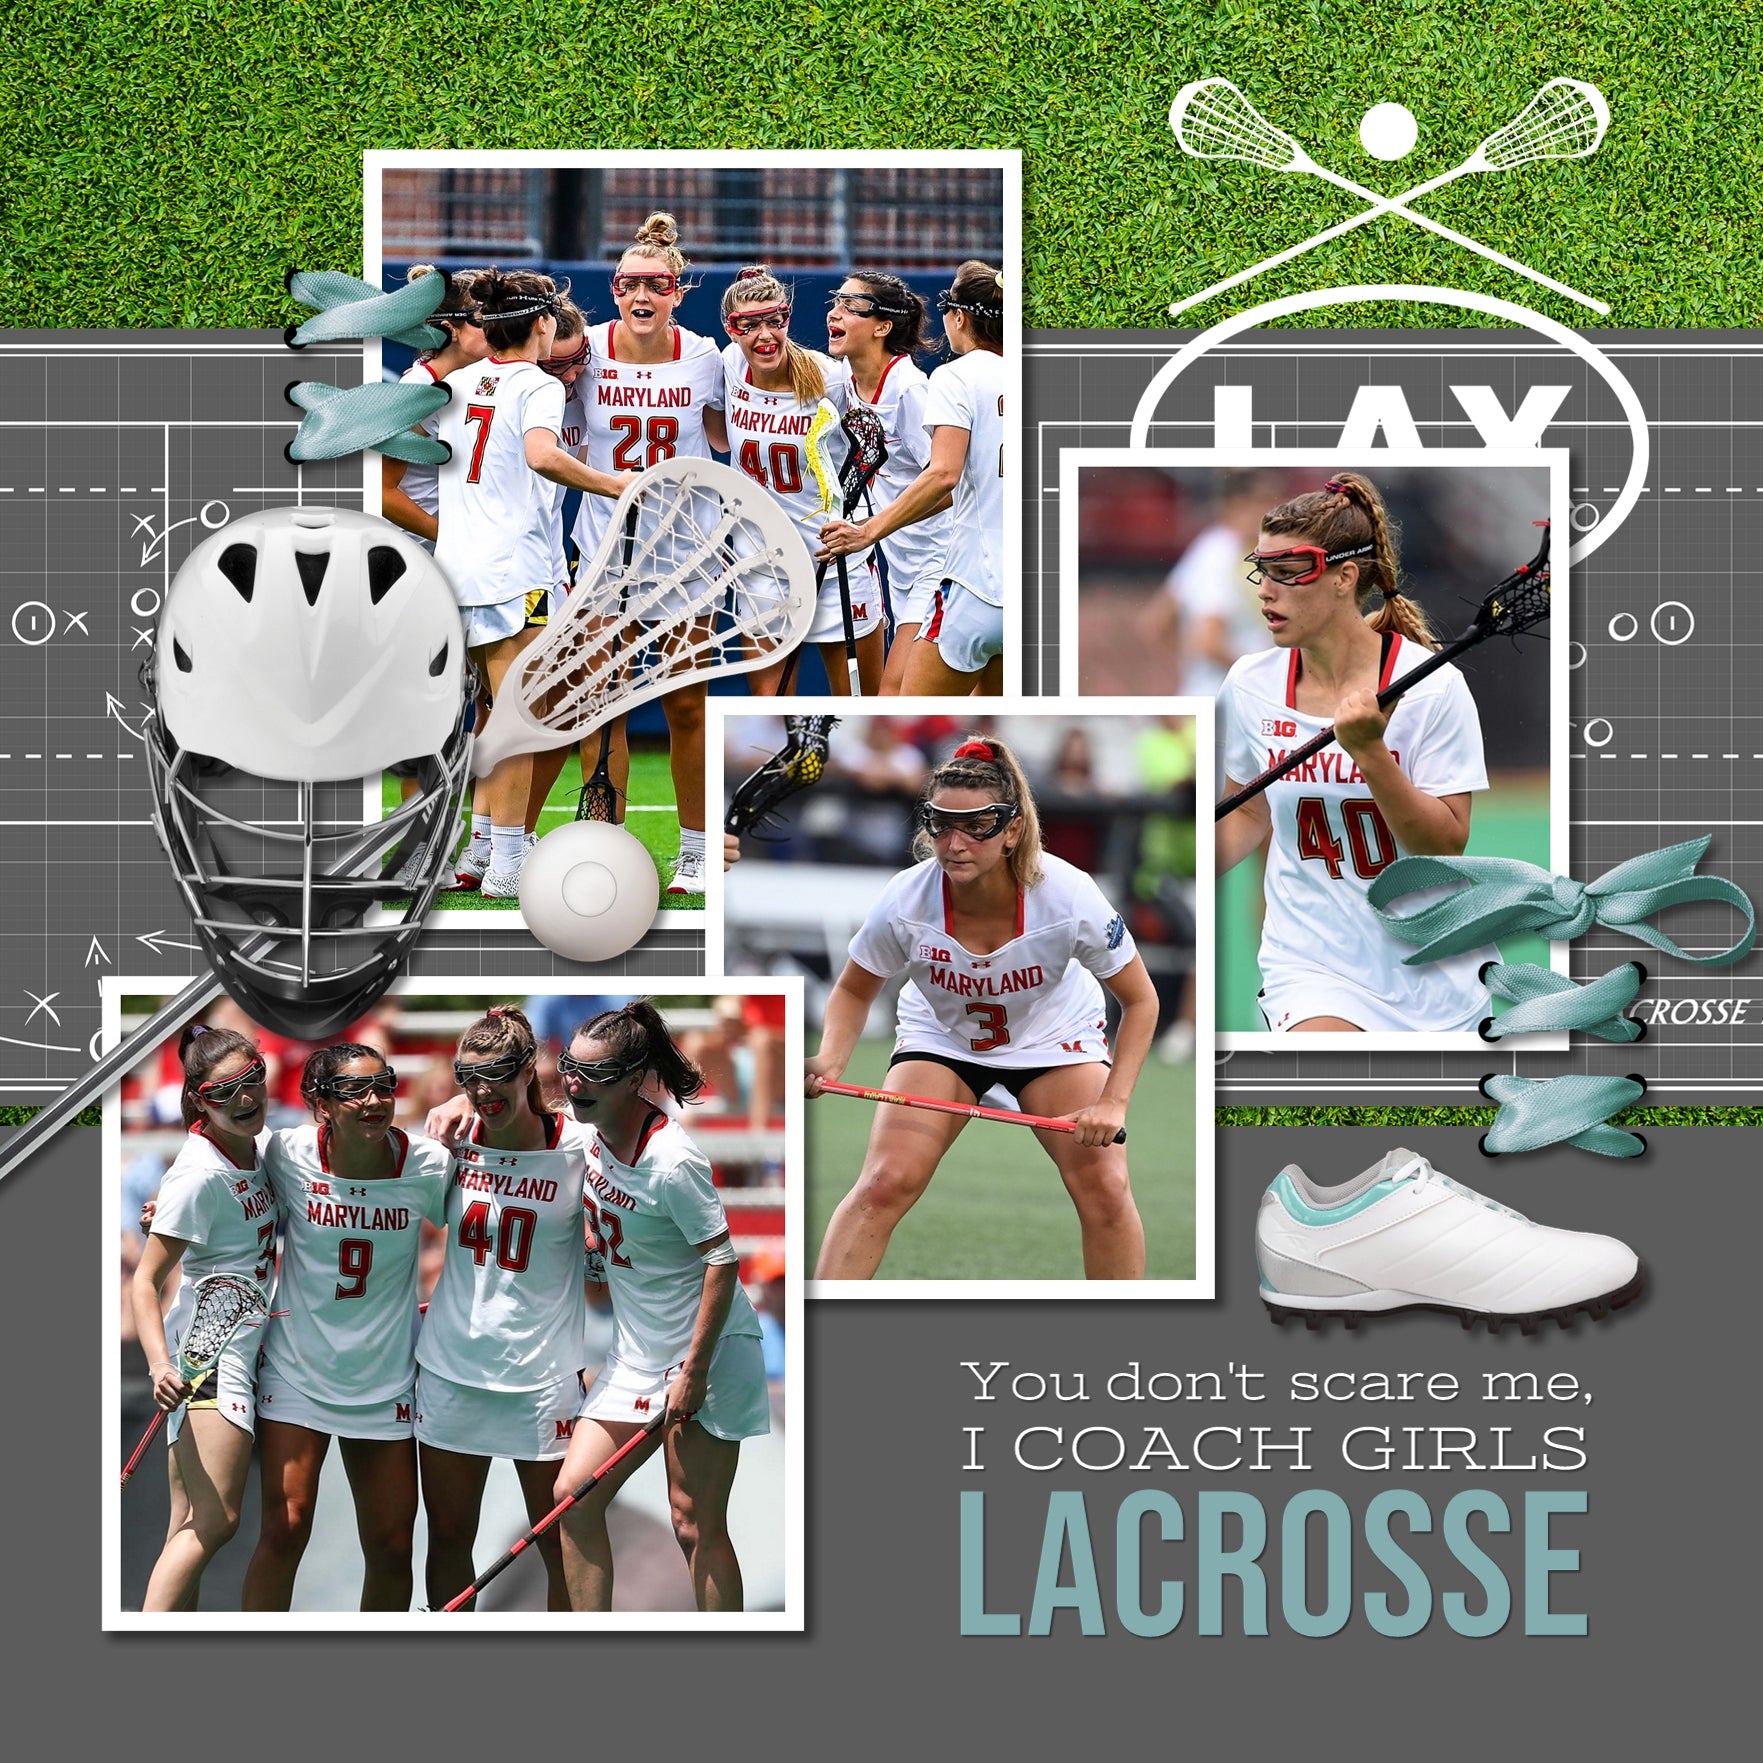 This clean and refreshing Ladies Lacrosse Digital Scrapbook Kit by Lucky Girl Creative covers all aspects of lacrosse in a photo-realist style that would appeal to anyone. Many of the digital art embellishments are neutral and can be used for men’s lacrosse as well. Embellishments include all protective gear, goggles, helmets, gloves, arm pads, knee pads, sticks, ball, tennis shoes, shoe laces, mouth guard, medals, LAX stickers, LAX stamps, field of play, clip board, strategy plays, netting, and more!